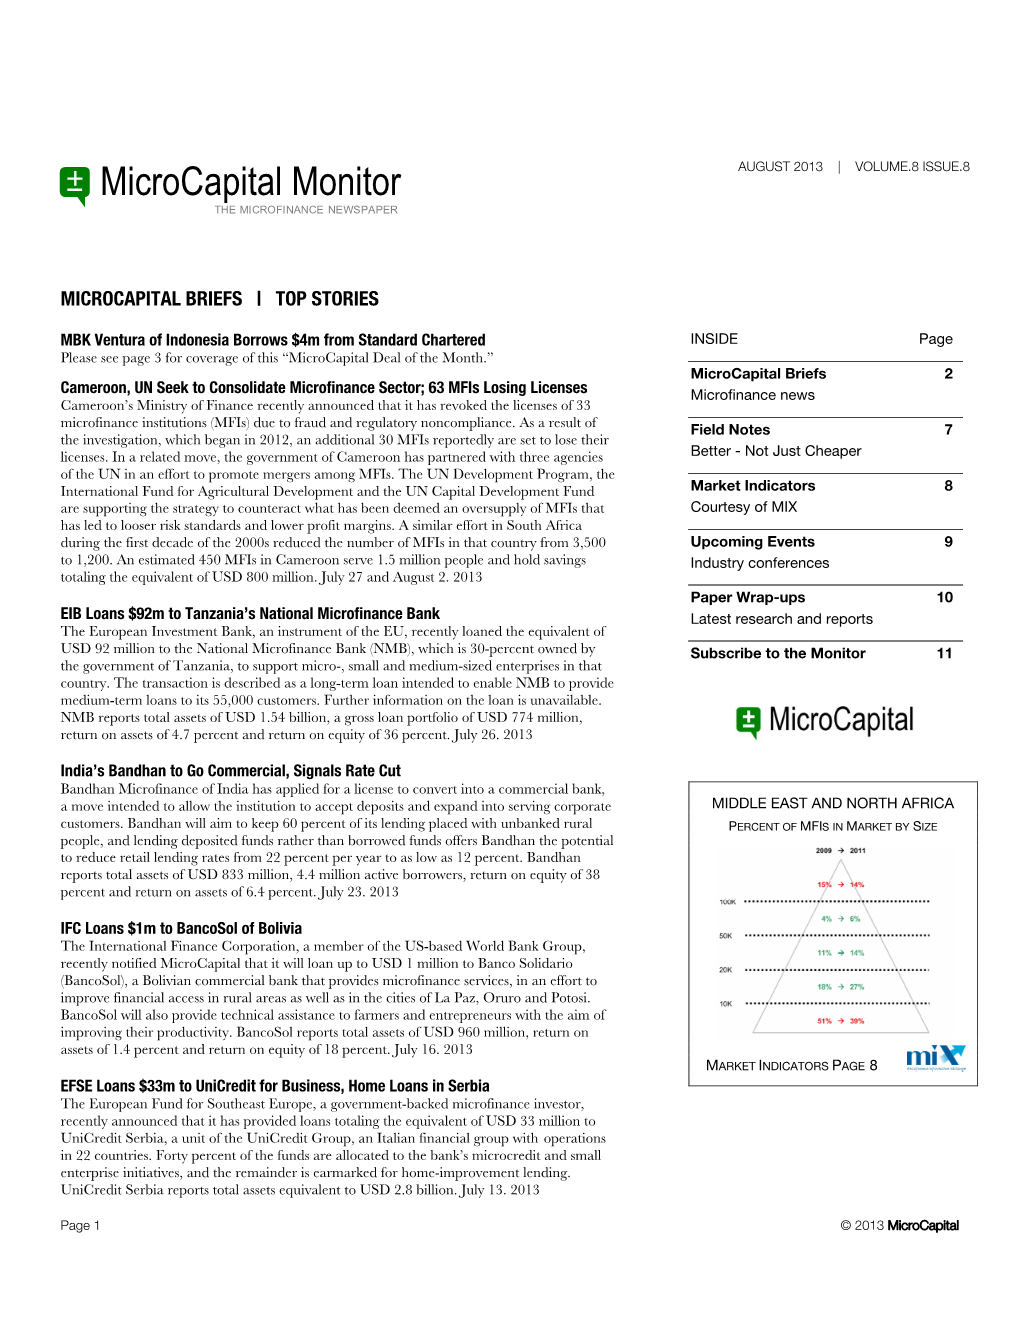 Microcapital Monitor AUGUST 2013 | VOLUME.8 ISSUE.8 the MICROFINANCE NEWSPAPER